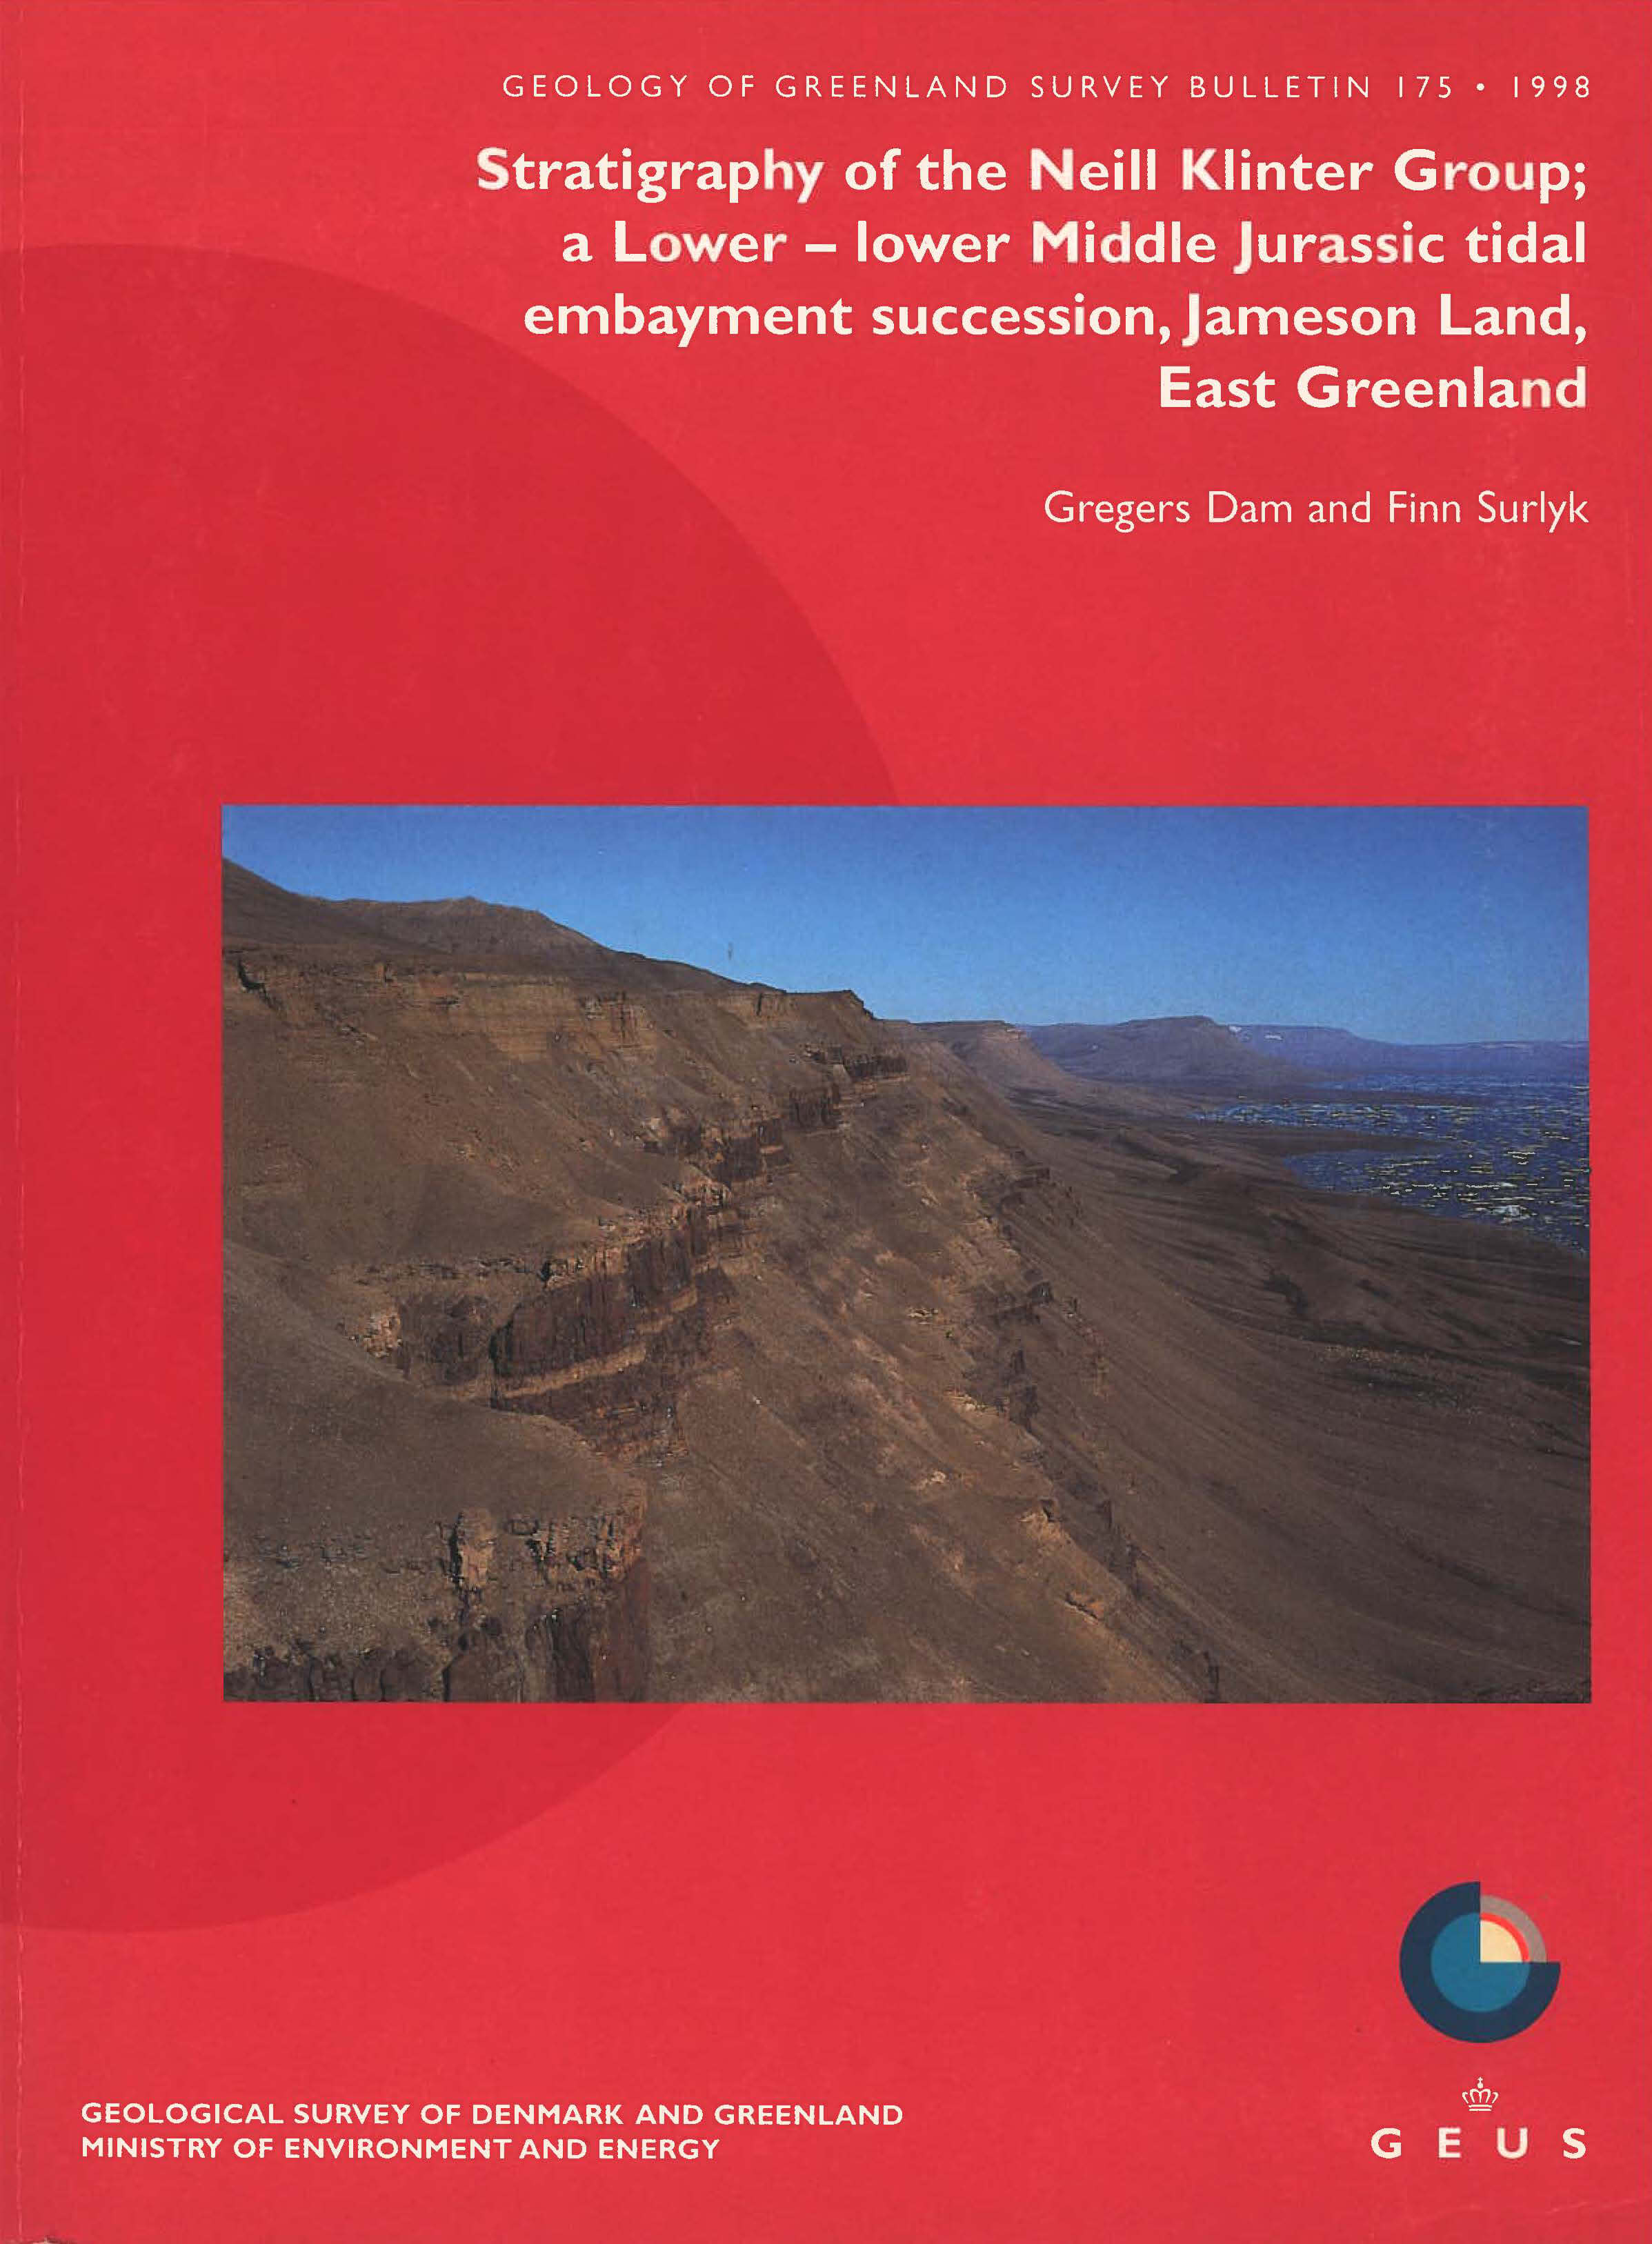 Geology of Greenland Survey Bulletin 175 cover showing mountains